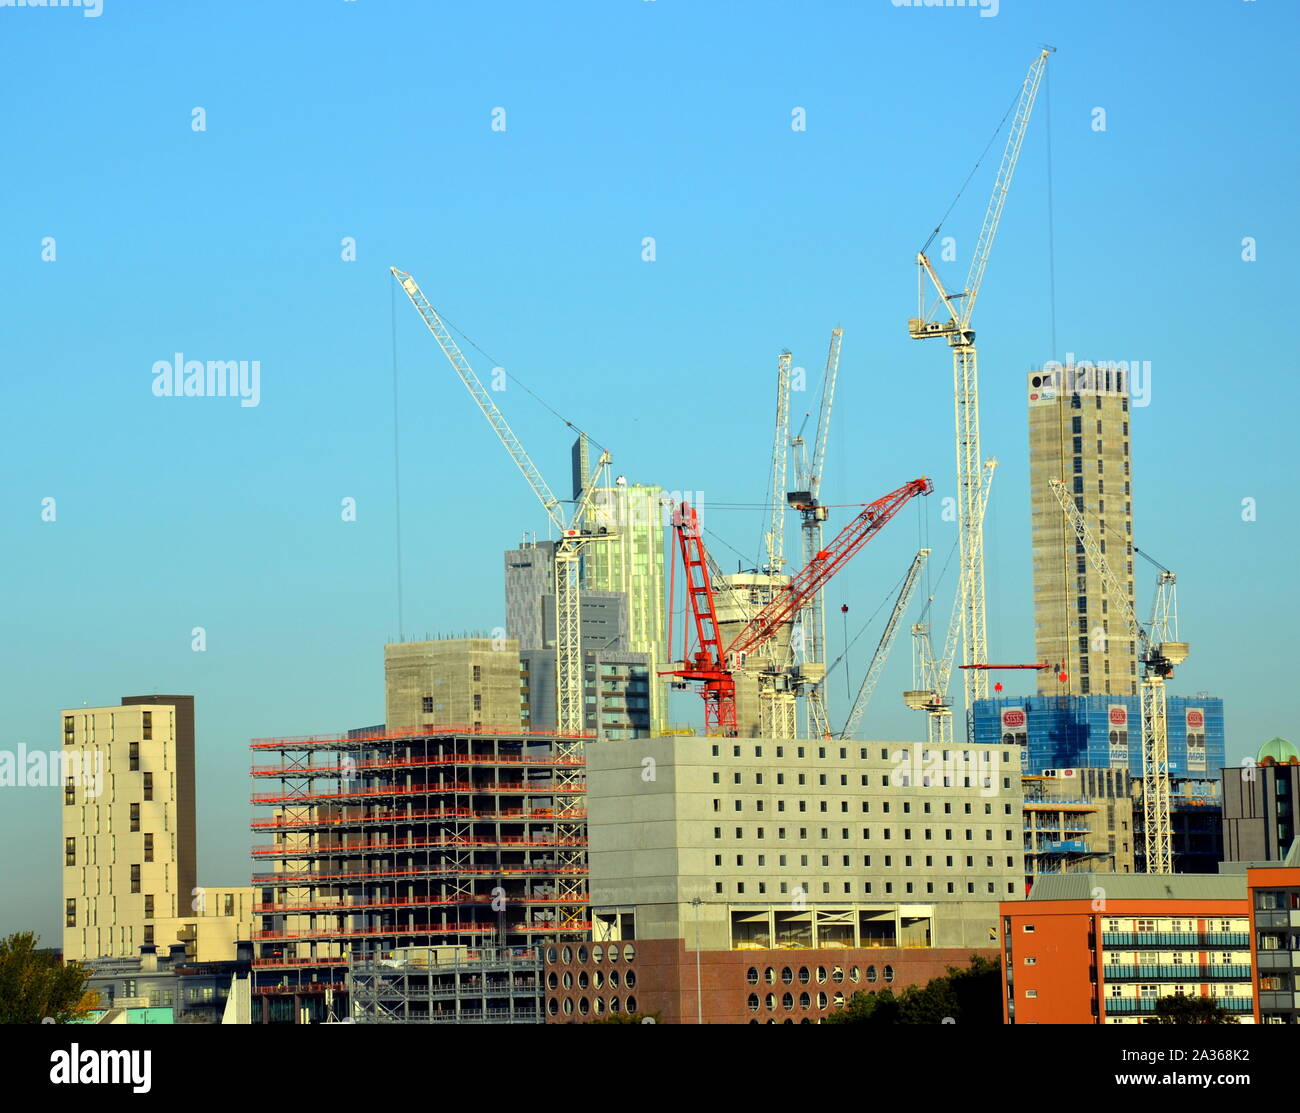 Construction of high rise buildings with tower cranes in central Manchester, United Kingdom, against a blue sky Stock Photo